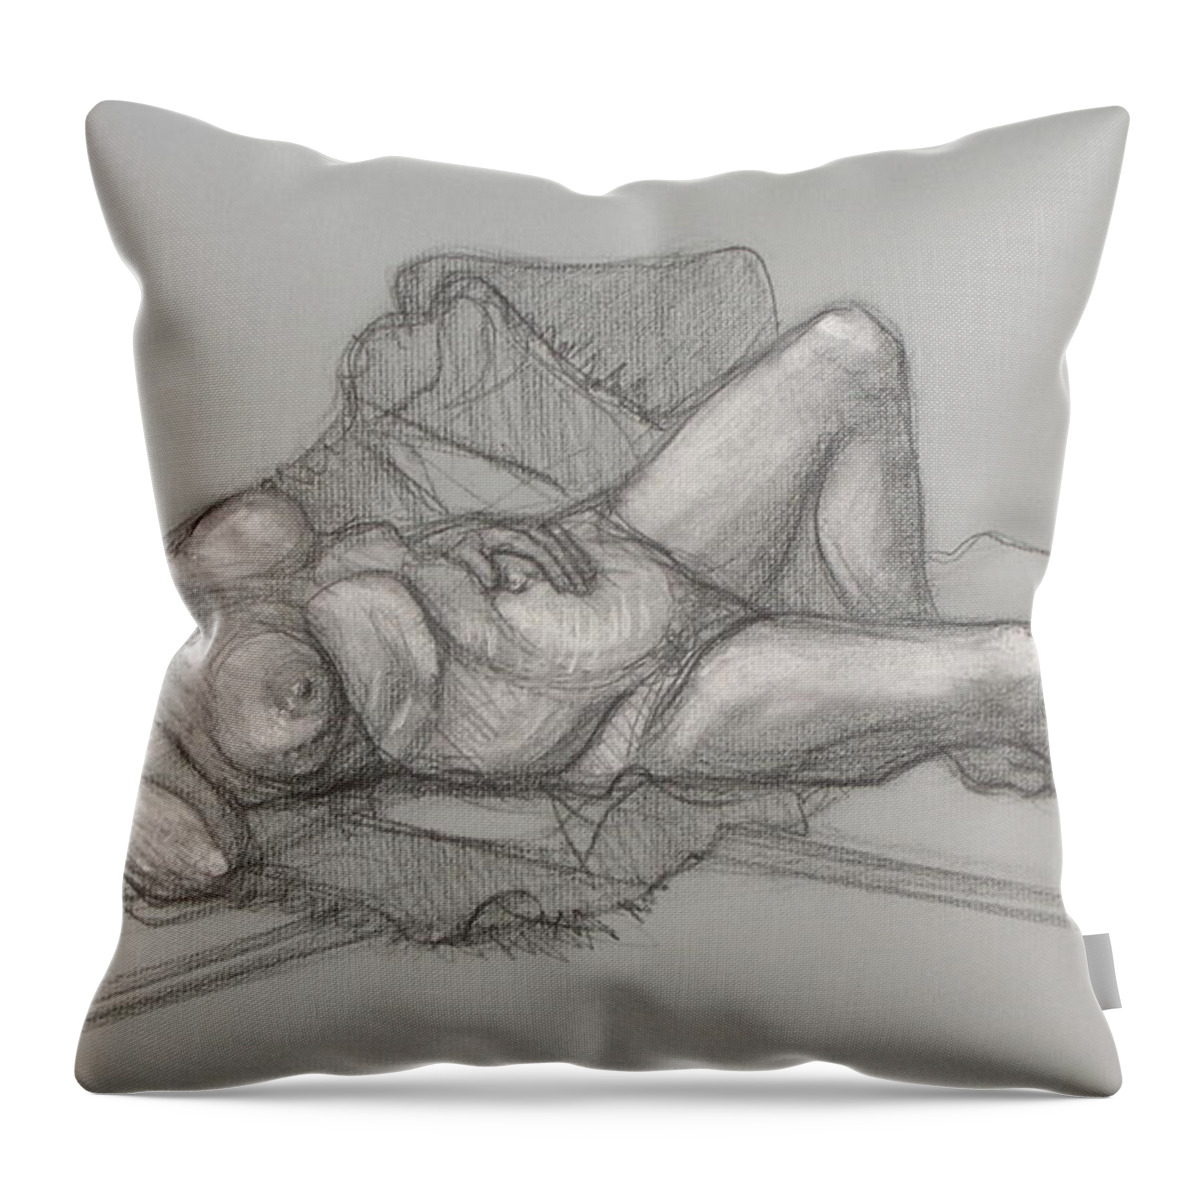 Realism Throw Pillow featuring the drawing Sandra Sleepimg by Donelli DiMaria